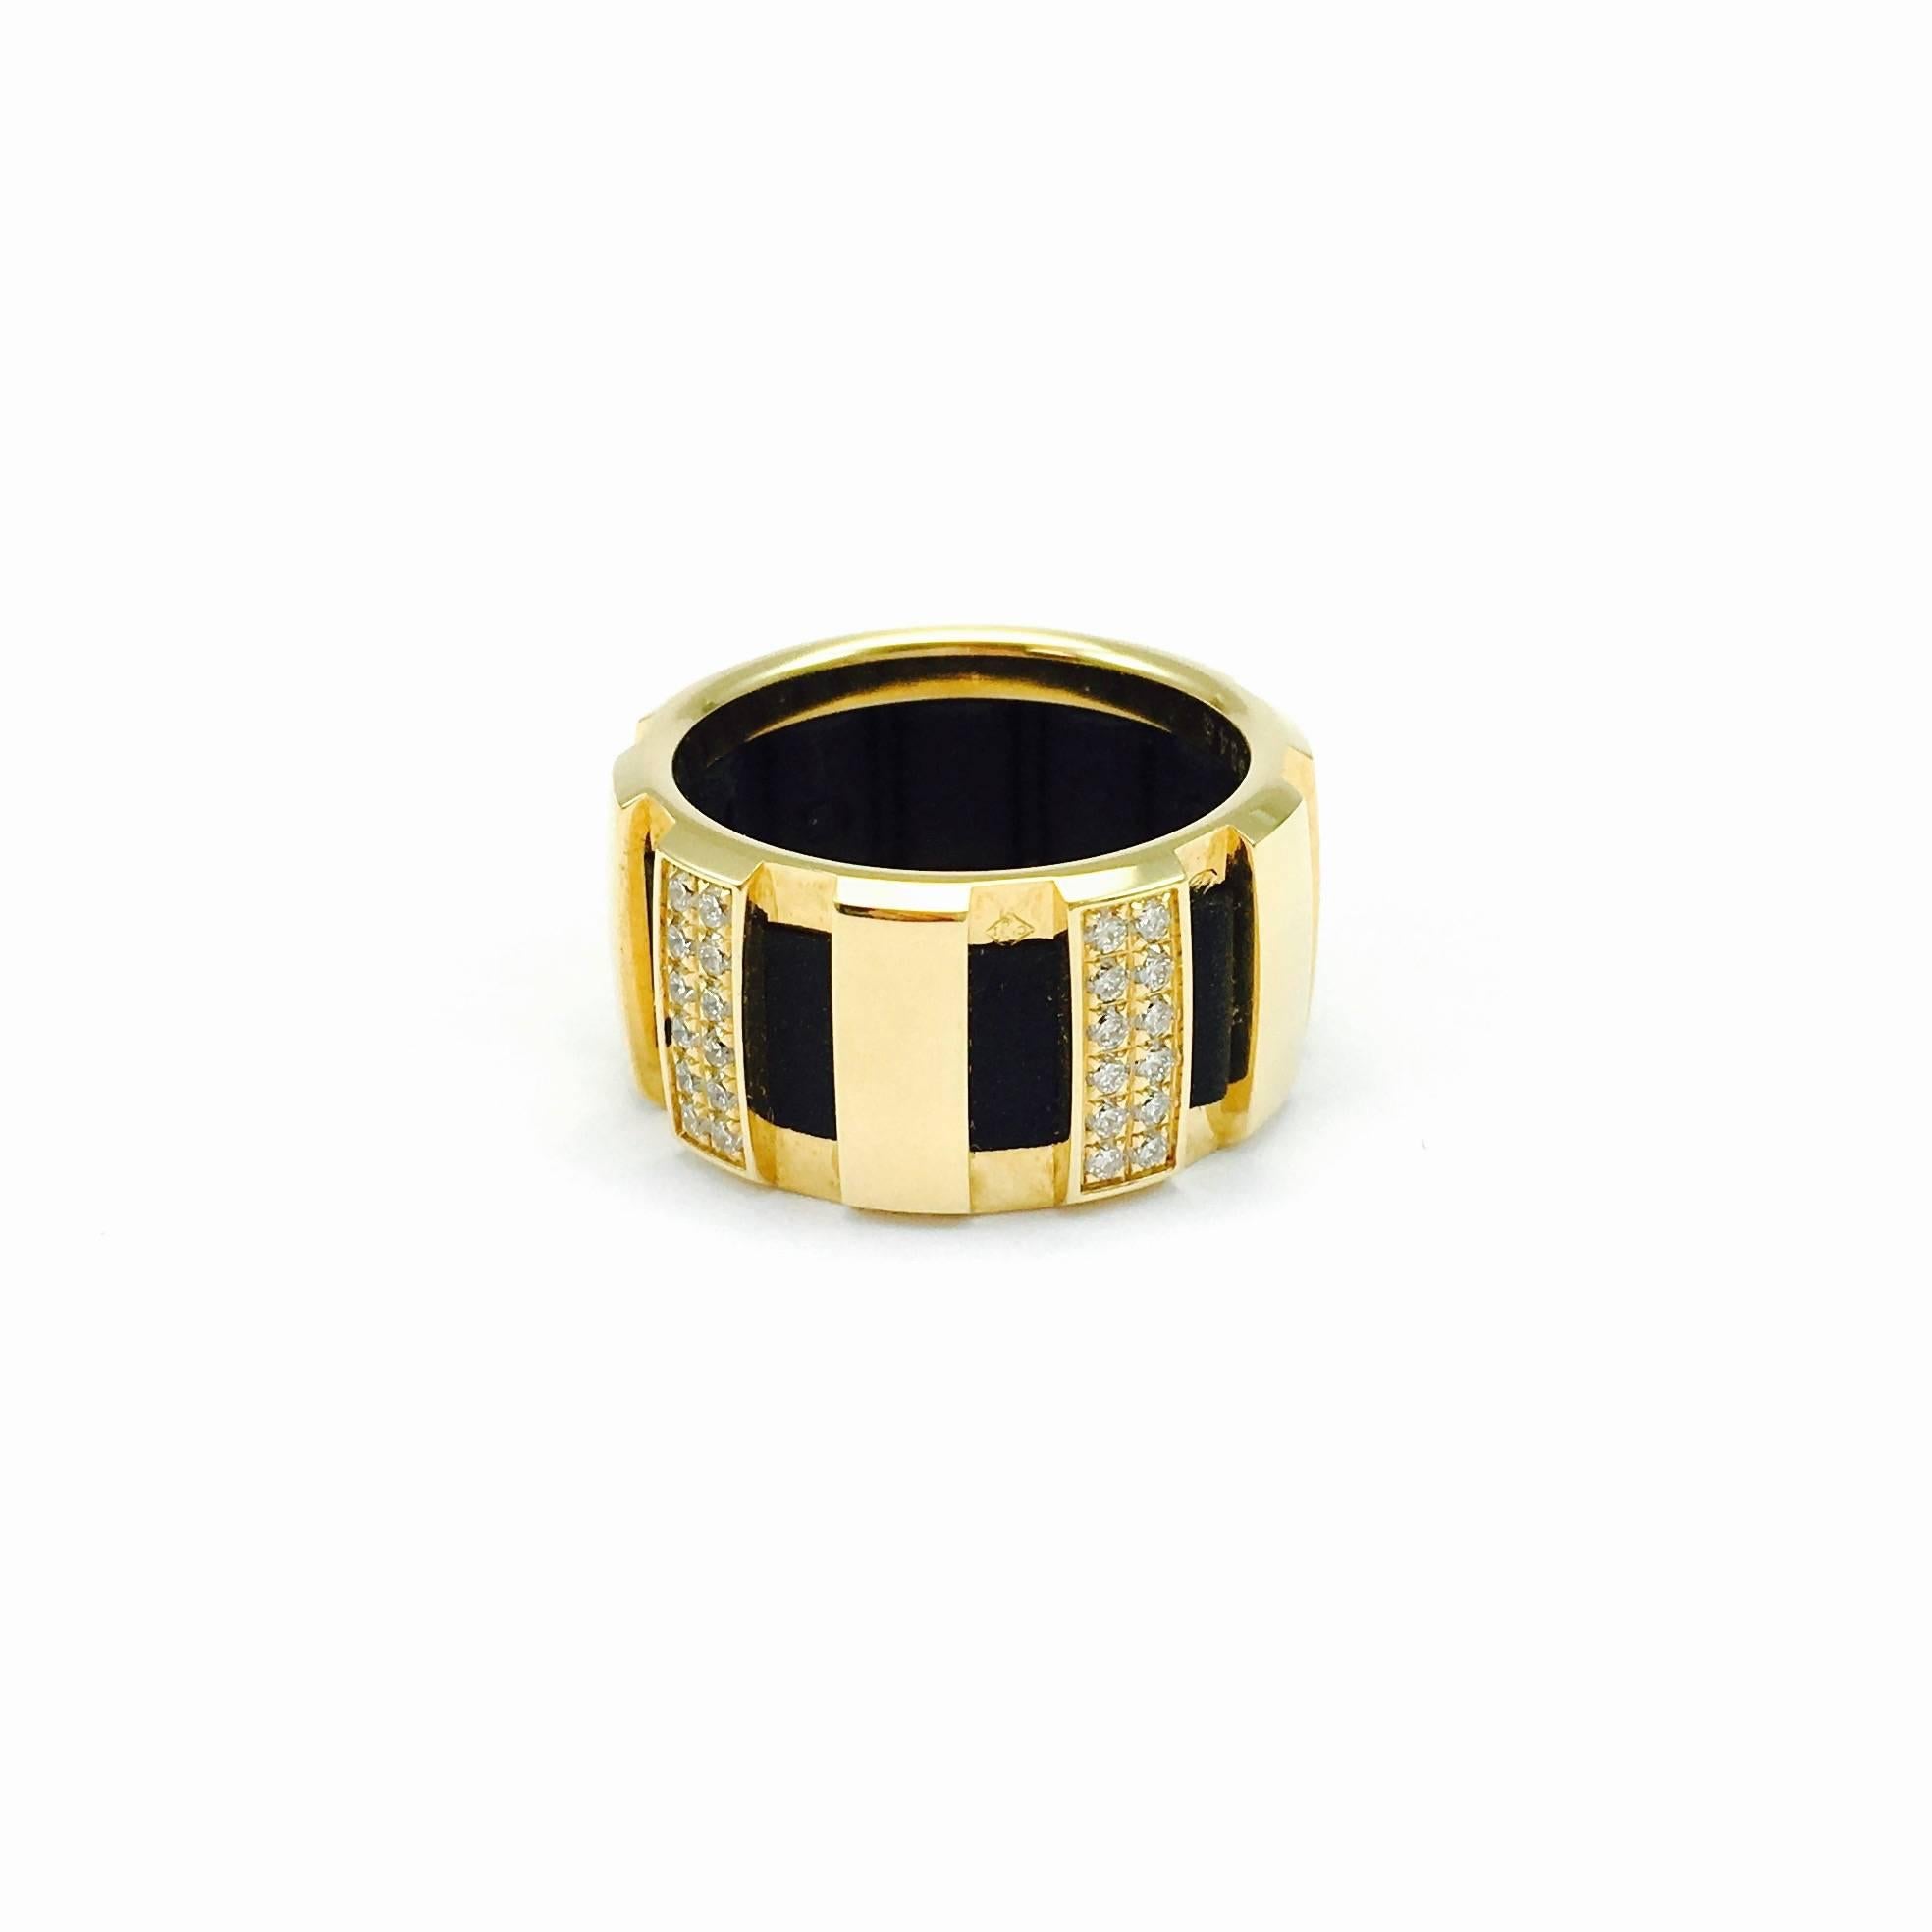 Magnificent yellow gold "Class One" ring decorated with black rubber, enhanced by a delicate brilliant cut diamonds pavement.  
Marked: 750 Chaumet 705545
Size: 50  US 5
Width: 10 mm
Weight: 8.4 grams
Condition: Excellent. Original